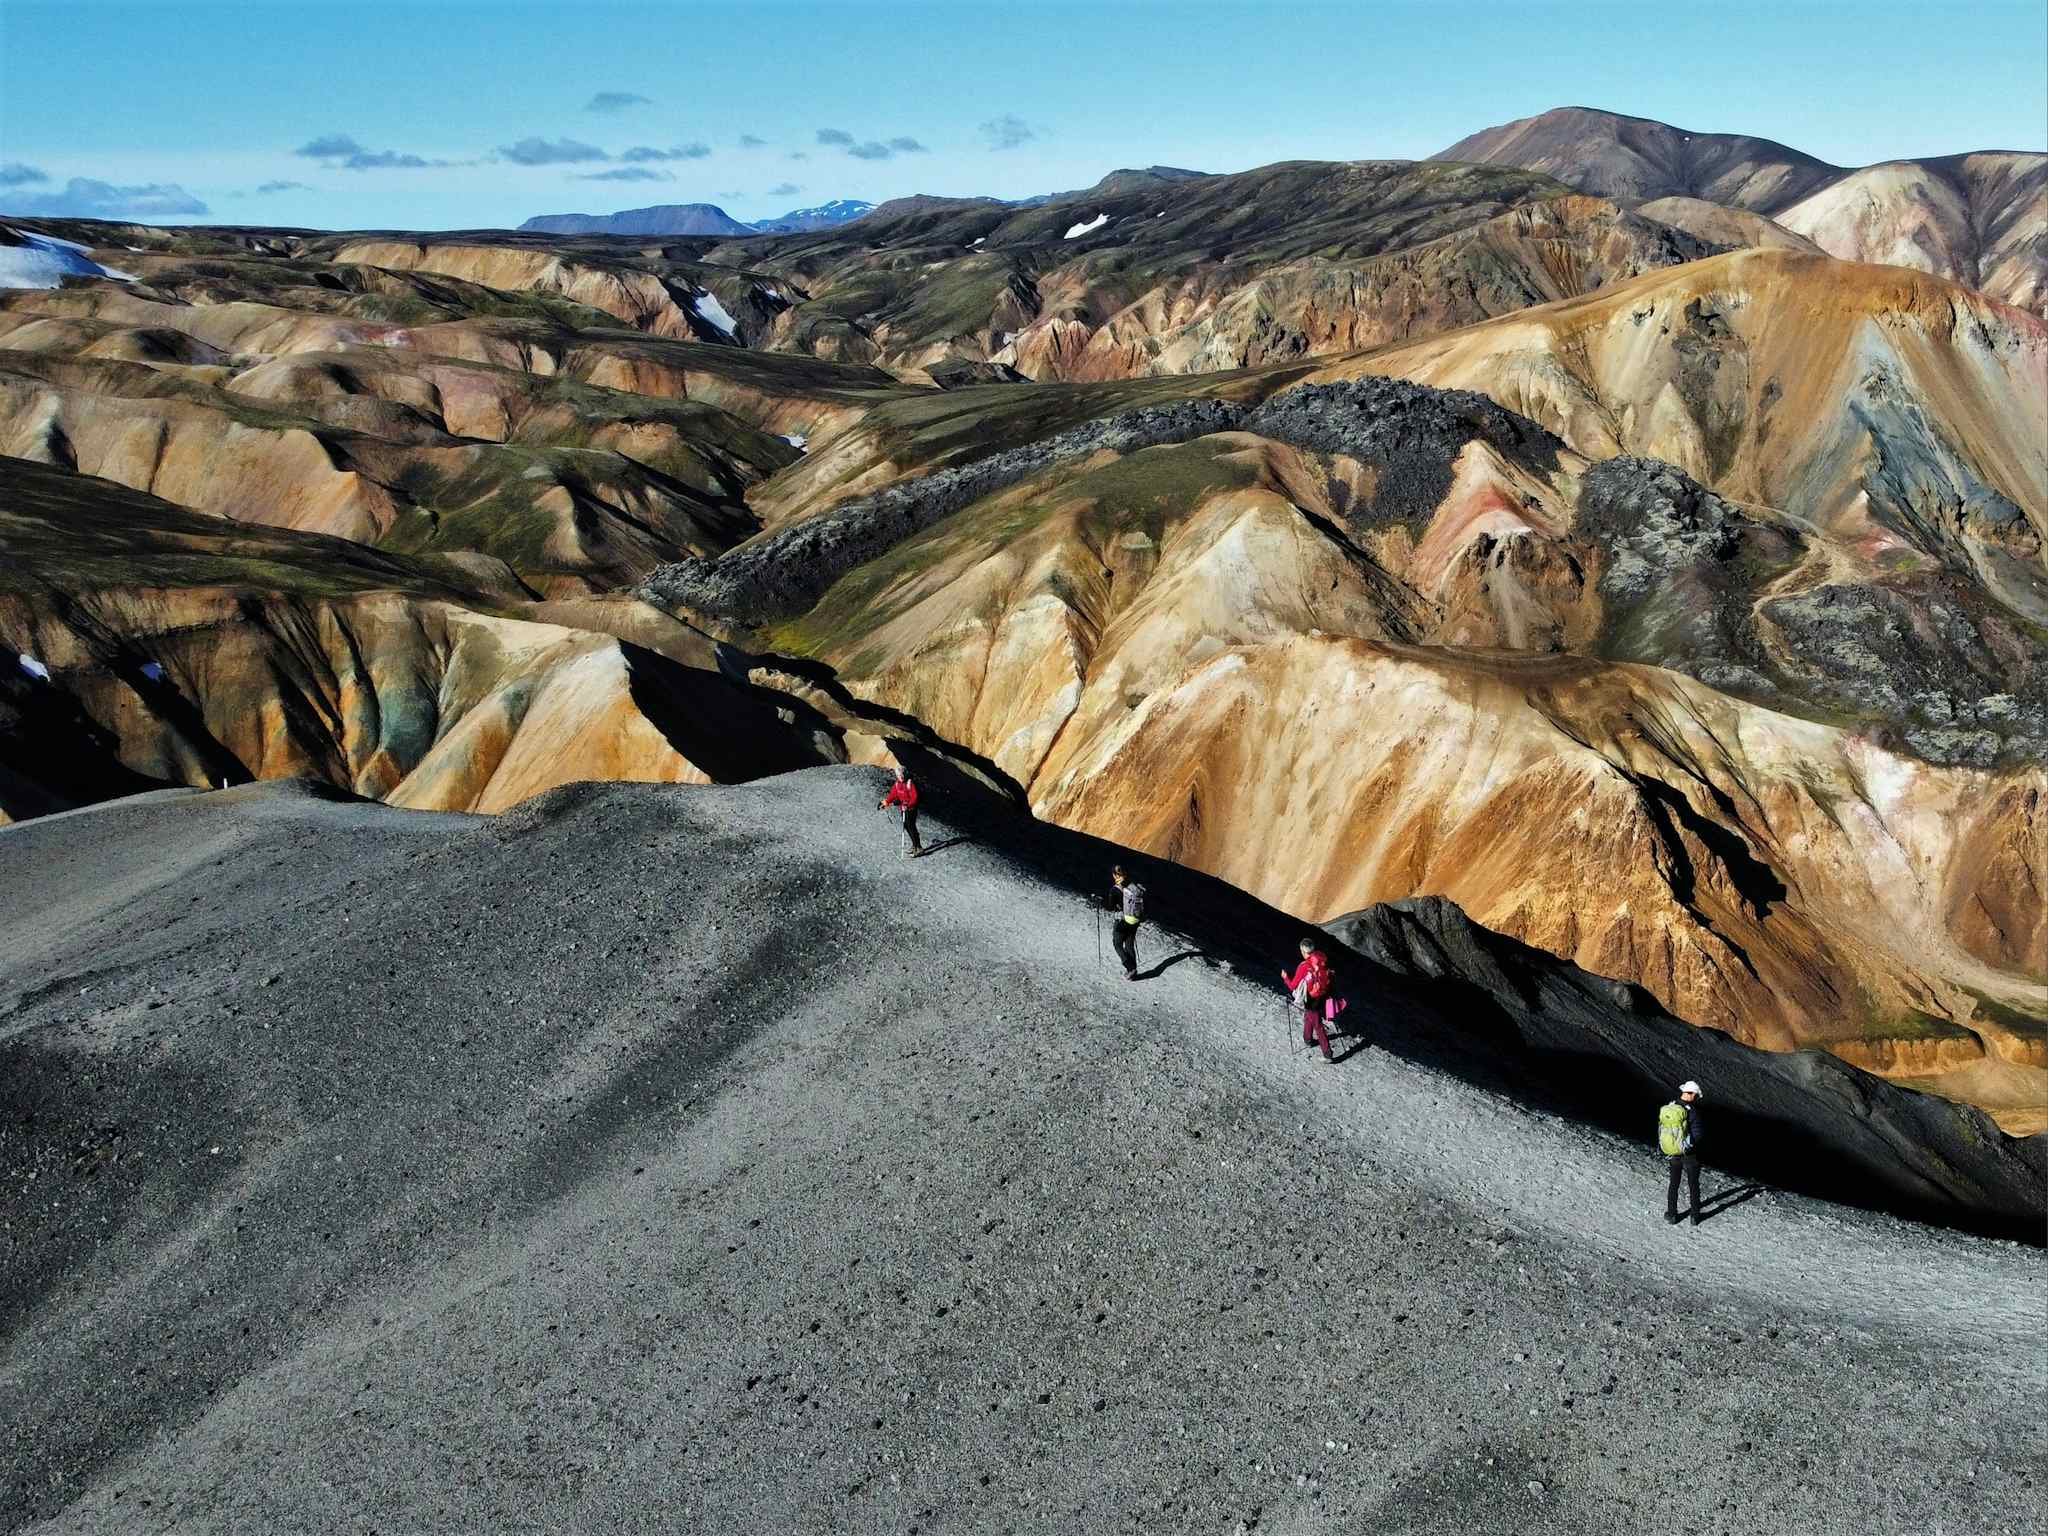 Hikers on the Laugavegur trail, Iceland. Photo: Icelandic Mountain Guides.